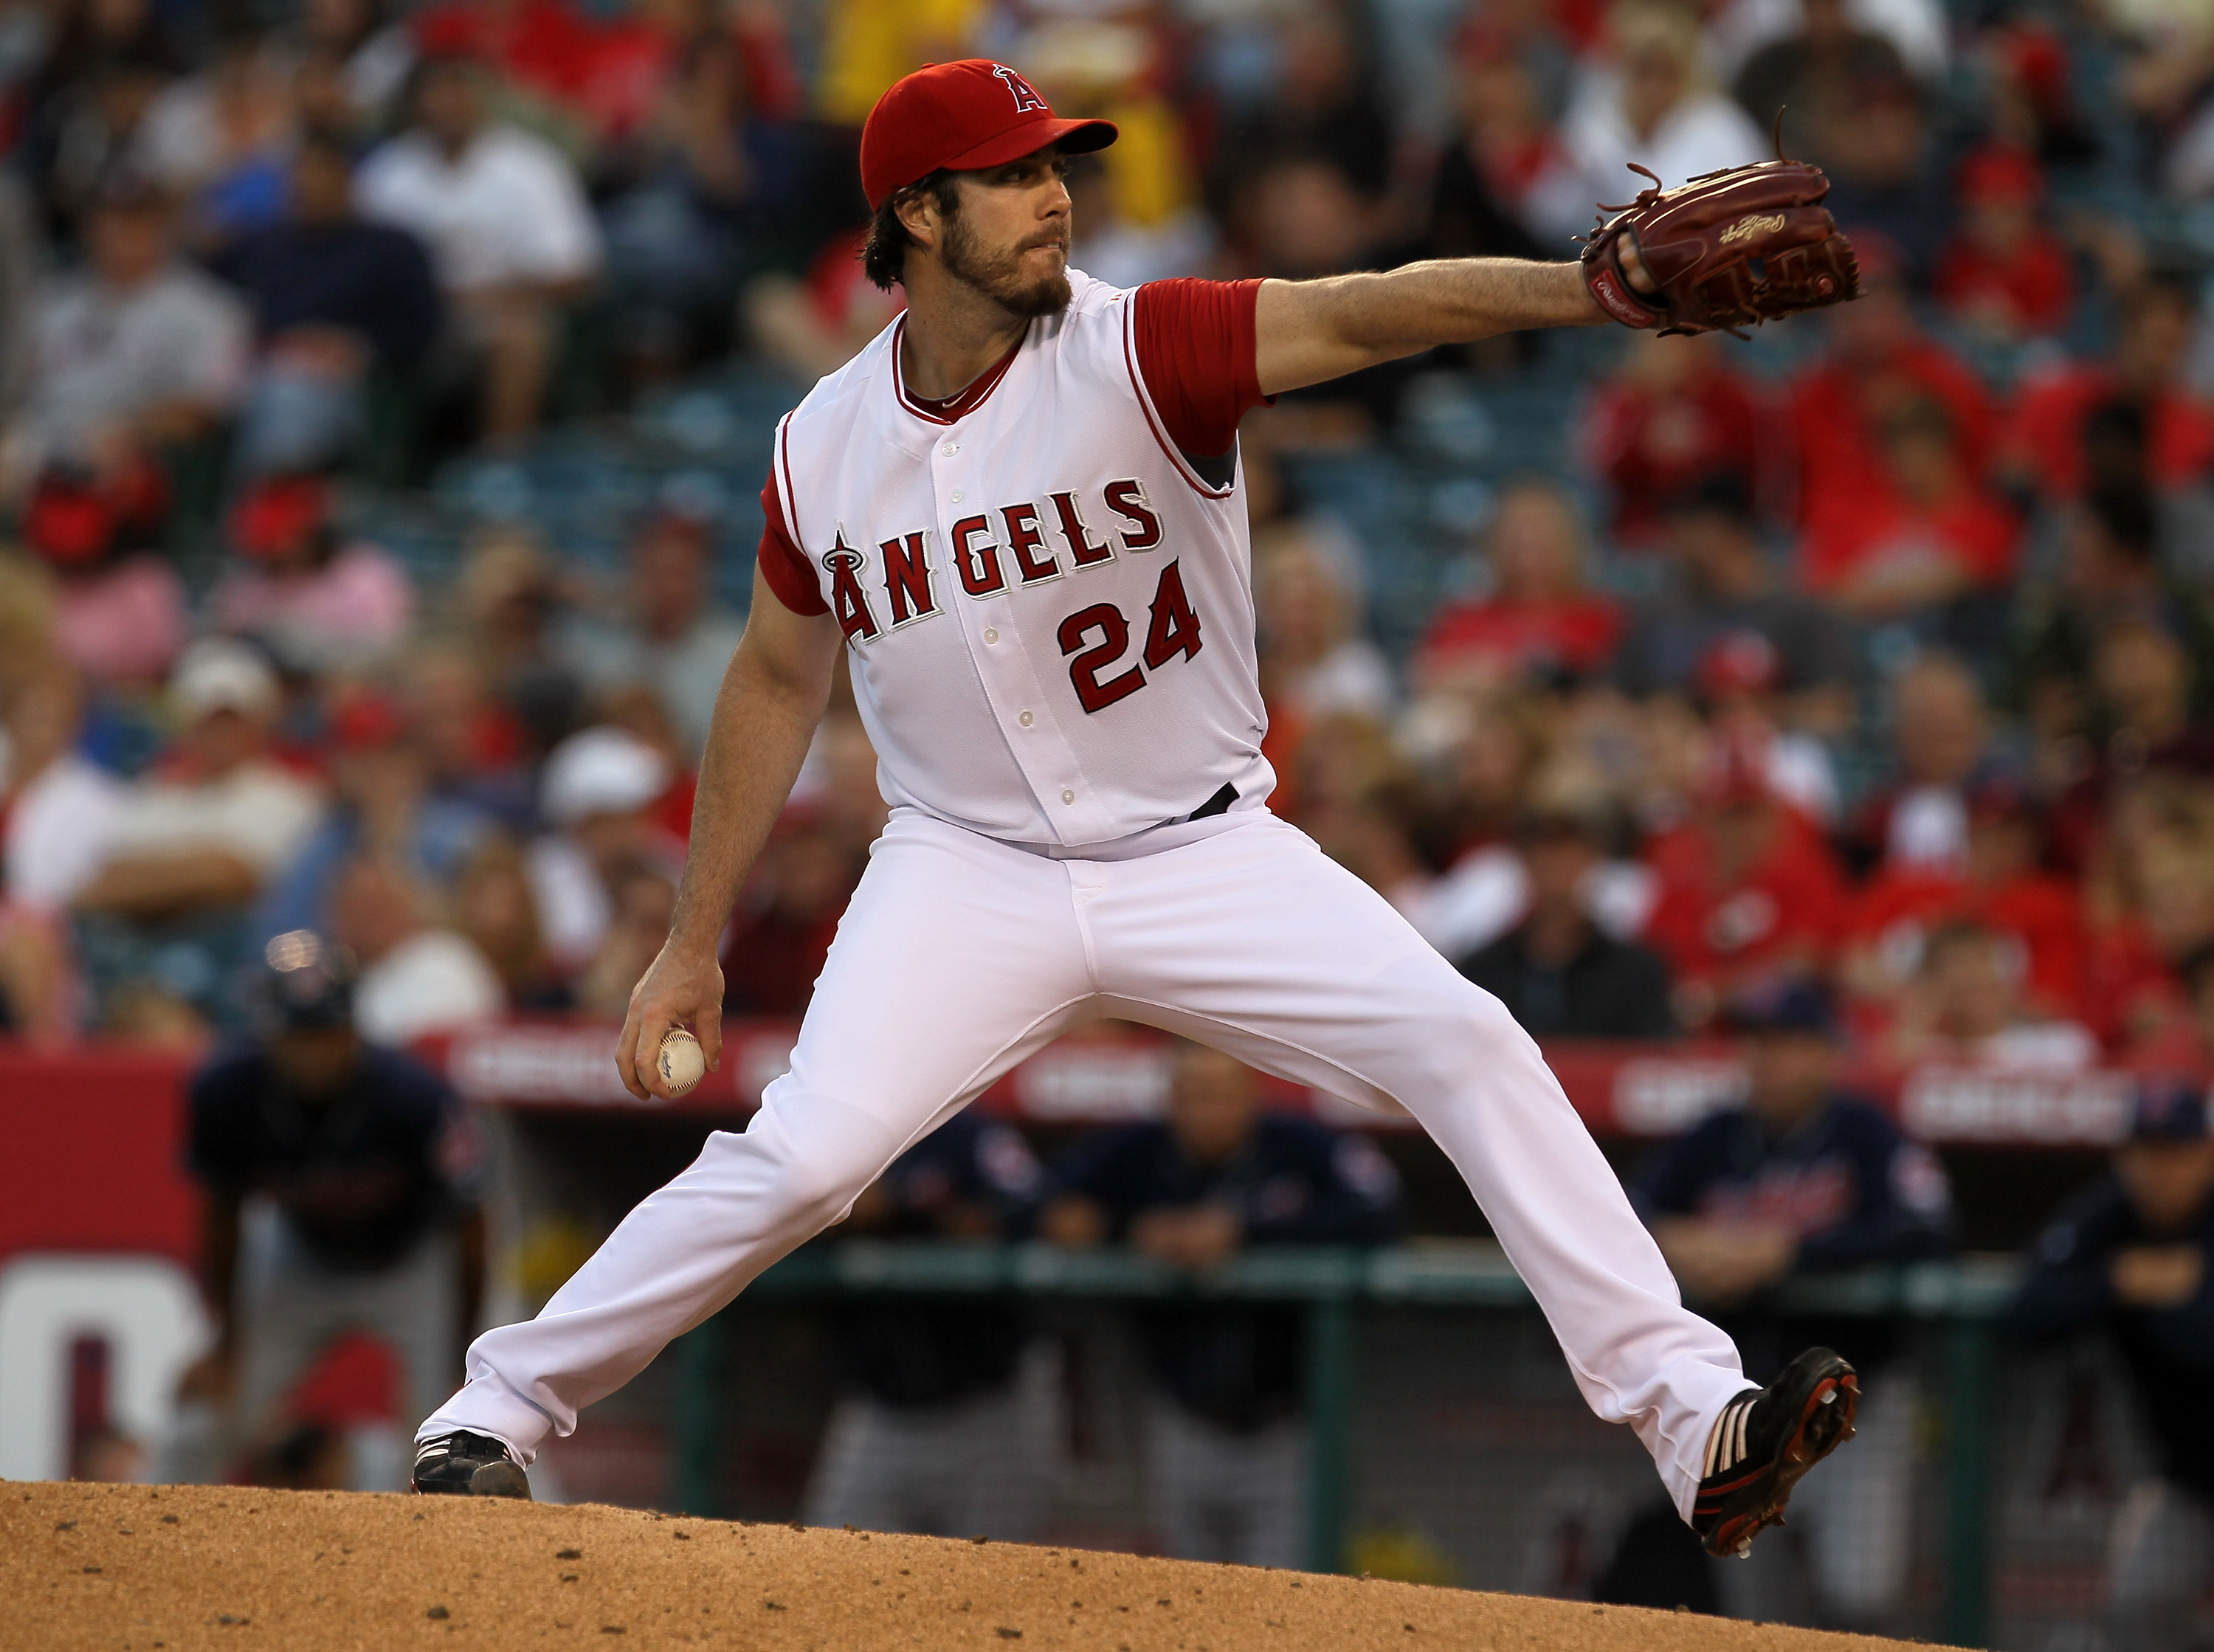 ANAHEIM, CA - SEPTEMBER 06:  Dan Haren #24 of the Los Angeles Angels of Anaheim pitches against the Cleveland Indians on September 6, 2010 at Angel Stadium in Anaheim, California.  (Photo by Stephen Dunn/Getty Images)